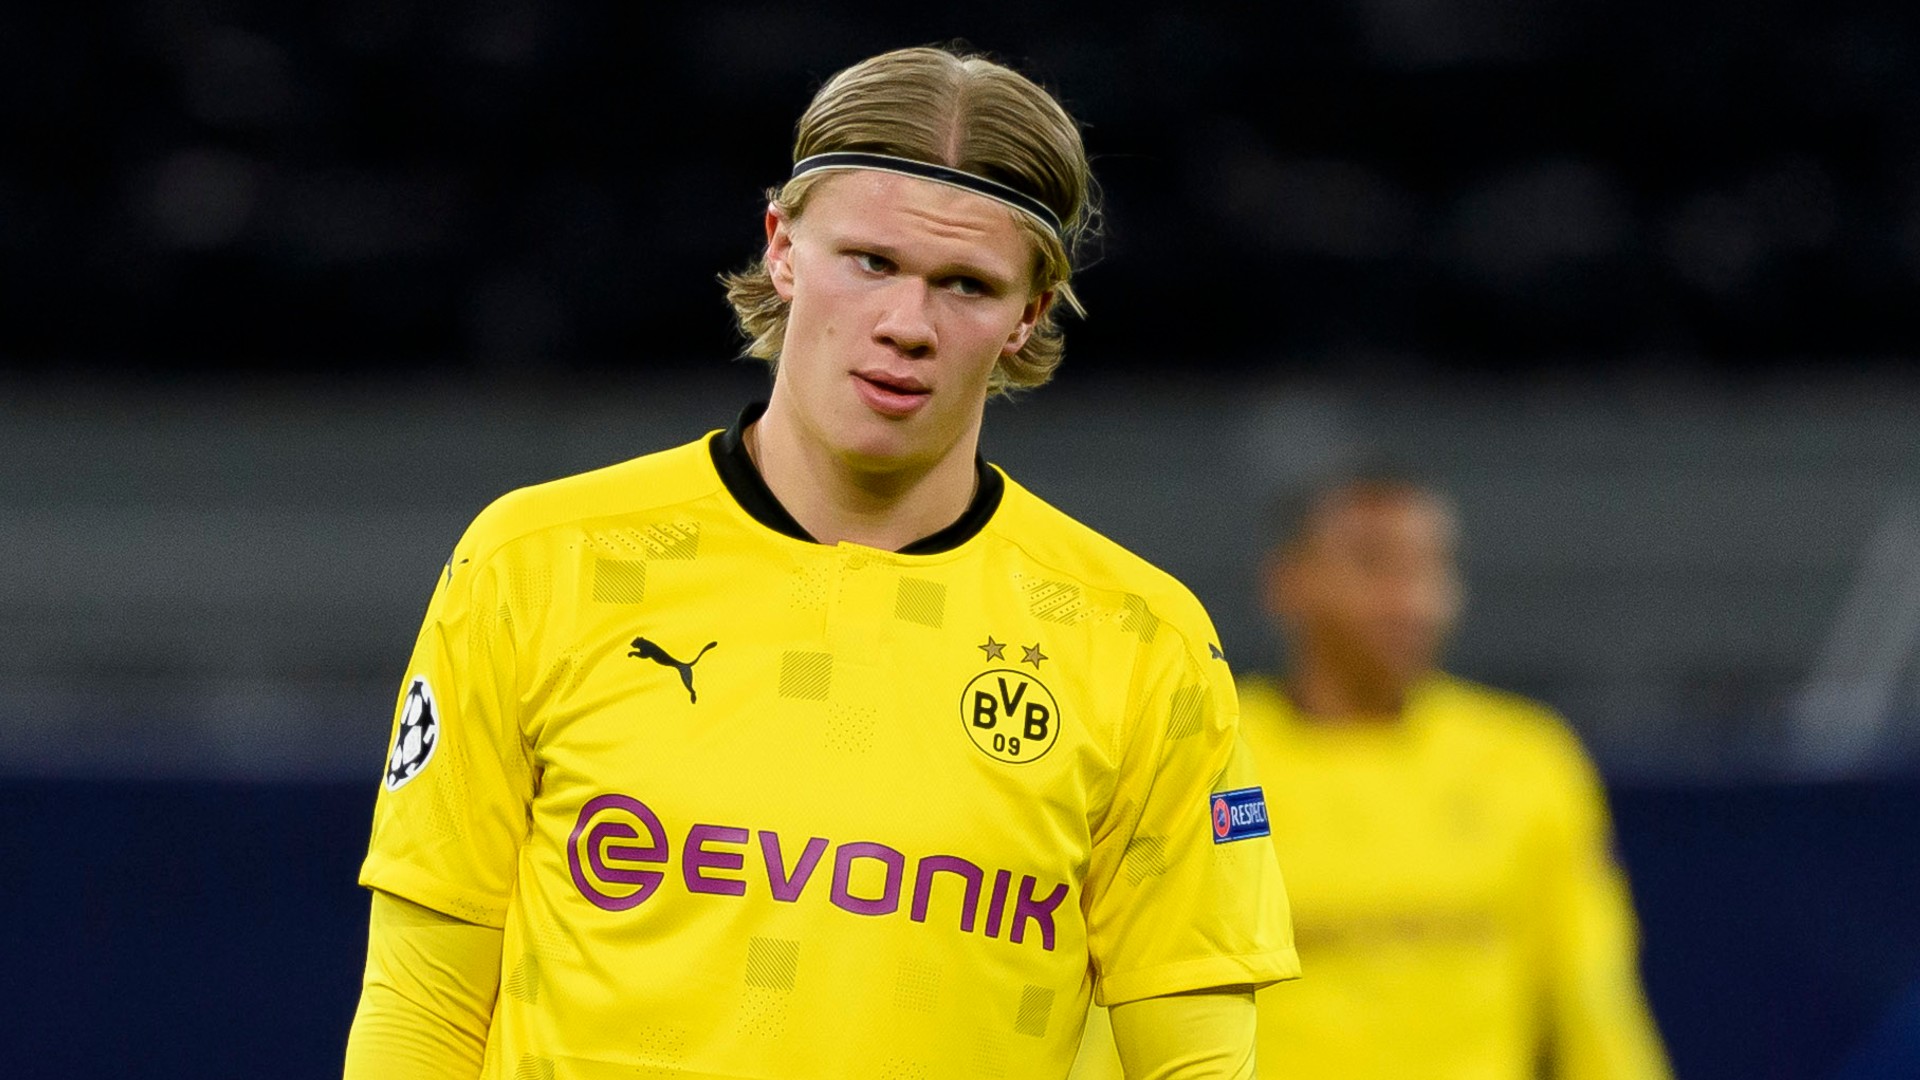 Erling Haaland's eye-opening salary demands could leave even football's richest clubs looking elsewhere.